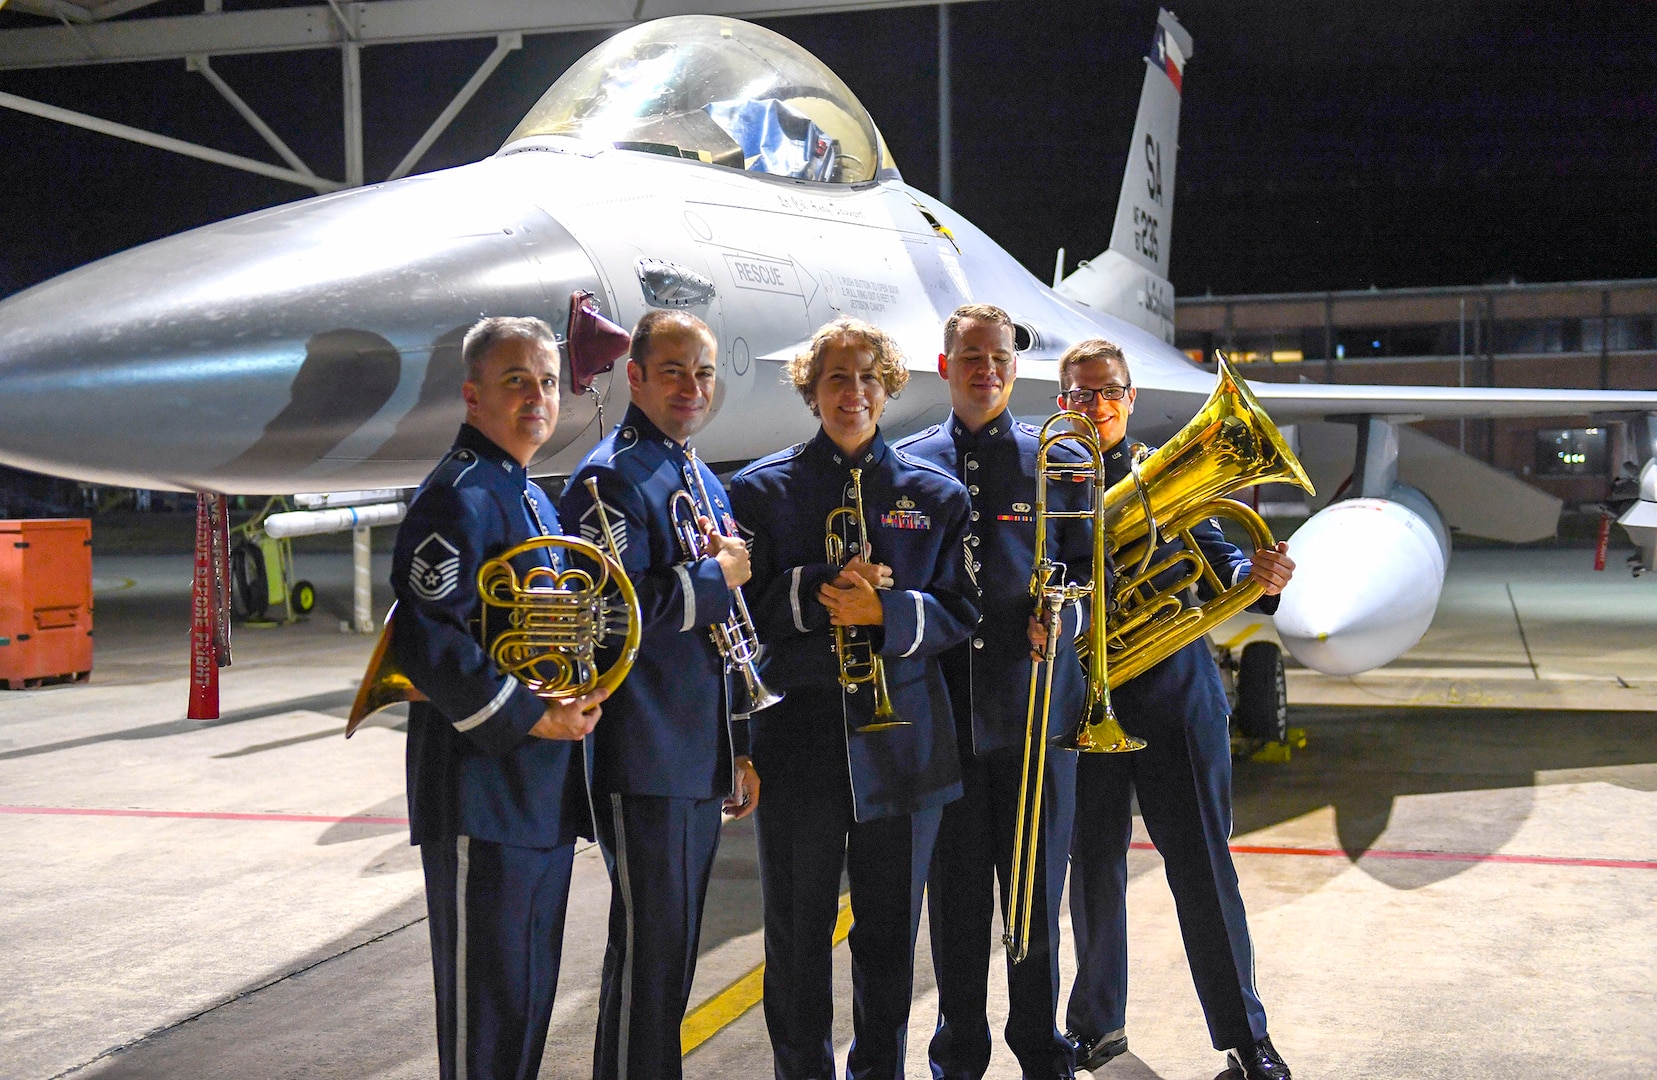 Members of the United States Air Force Band of the West pose in front of an F-16 Fighting Falcon, an aircraft assigned to the 149th Fighter Wing Sept. 18 at Joint Base San Antonio-Lackland in honor of the Air Force’s 72nd birthday.